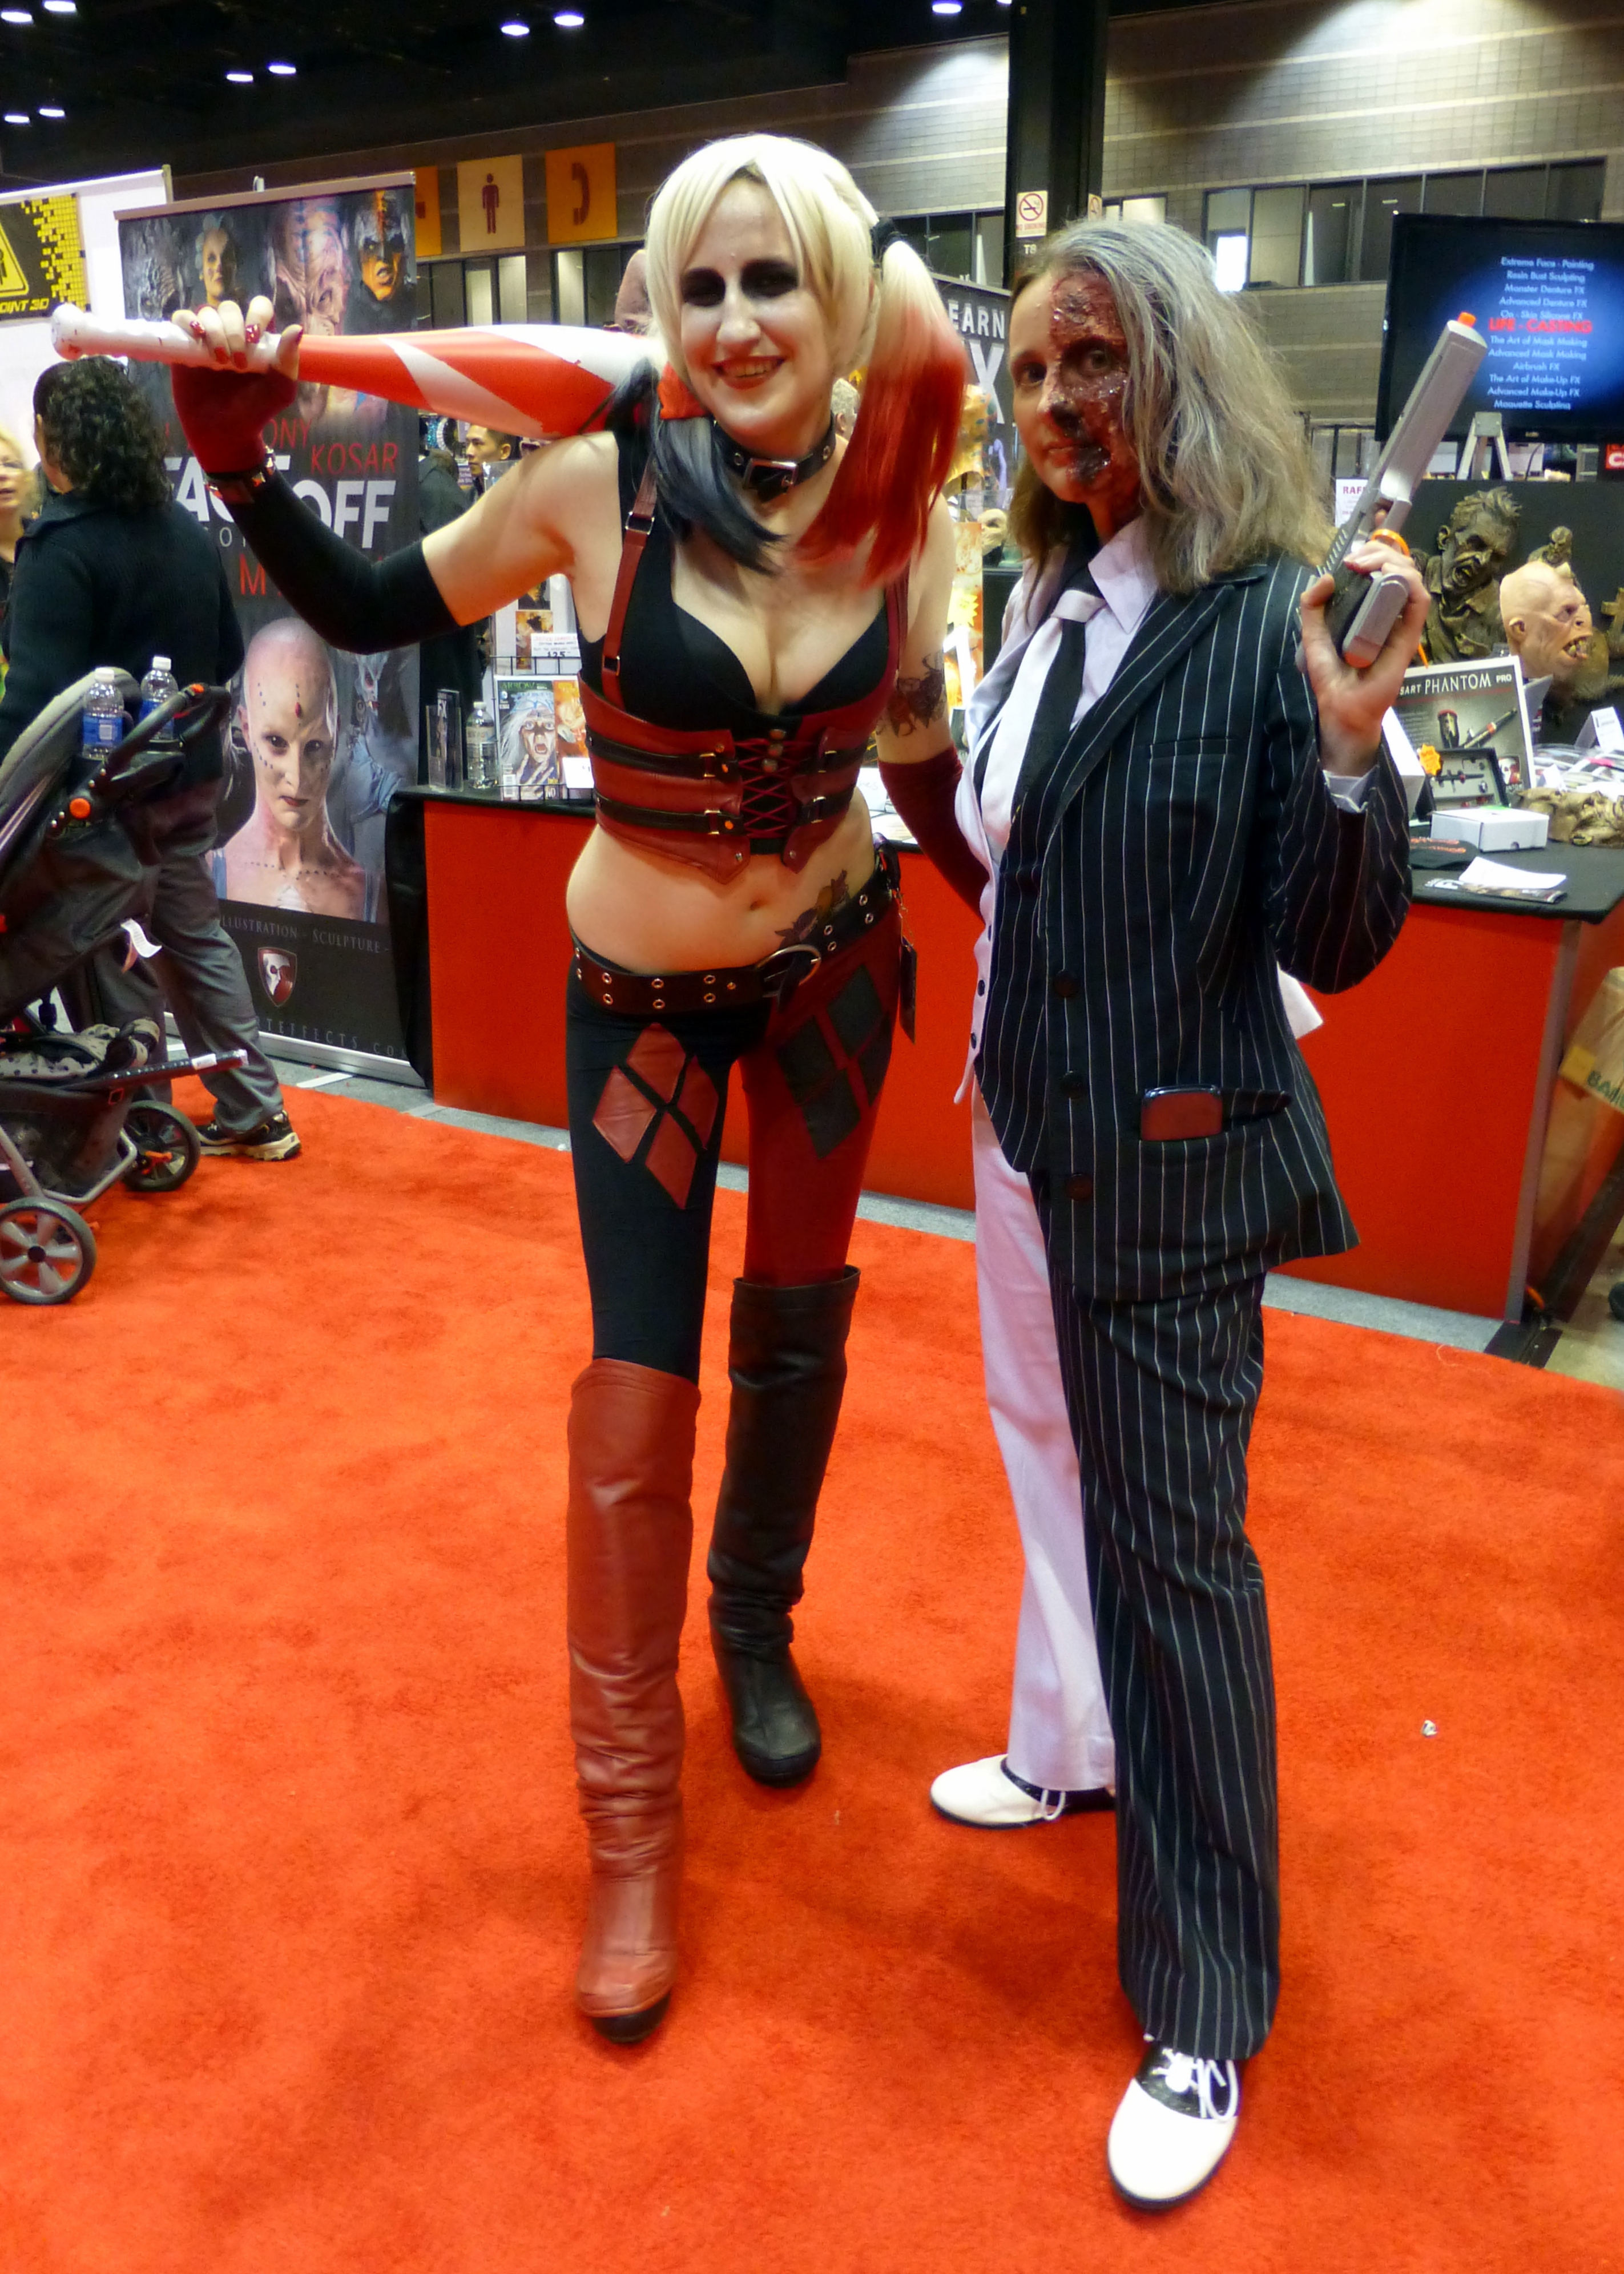 File:Crossplay Two Face.jpg - Wikimedia Commons